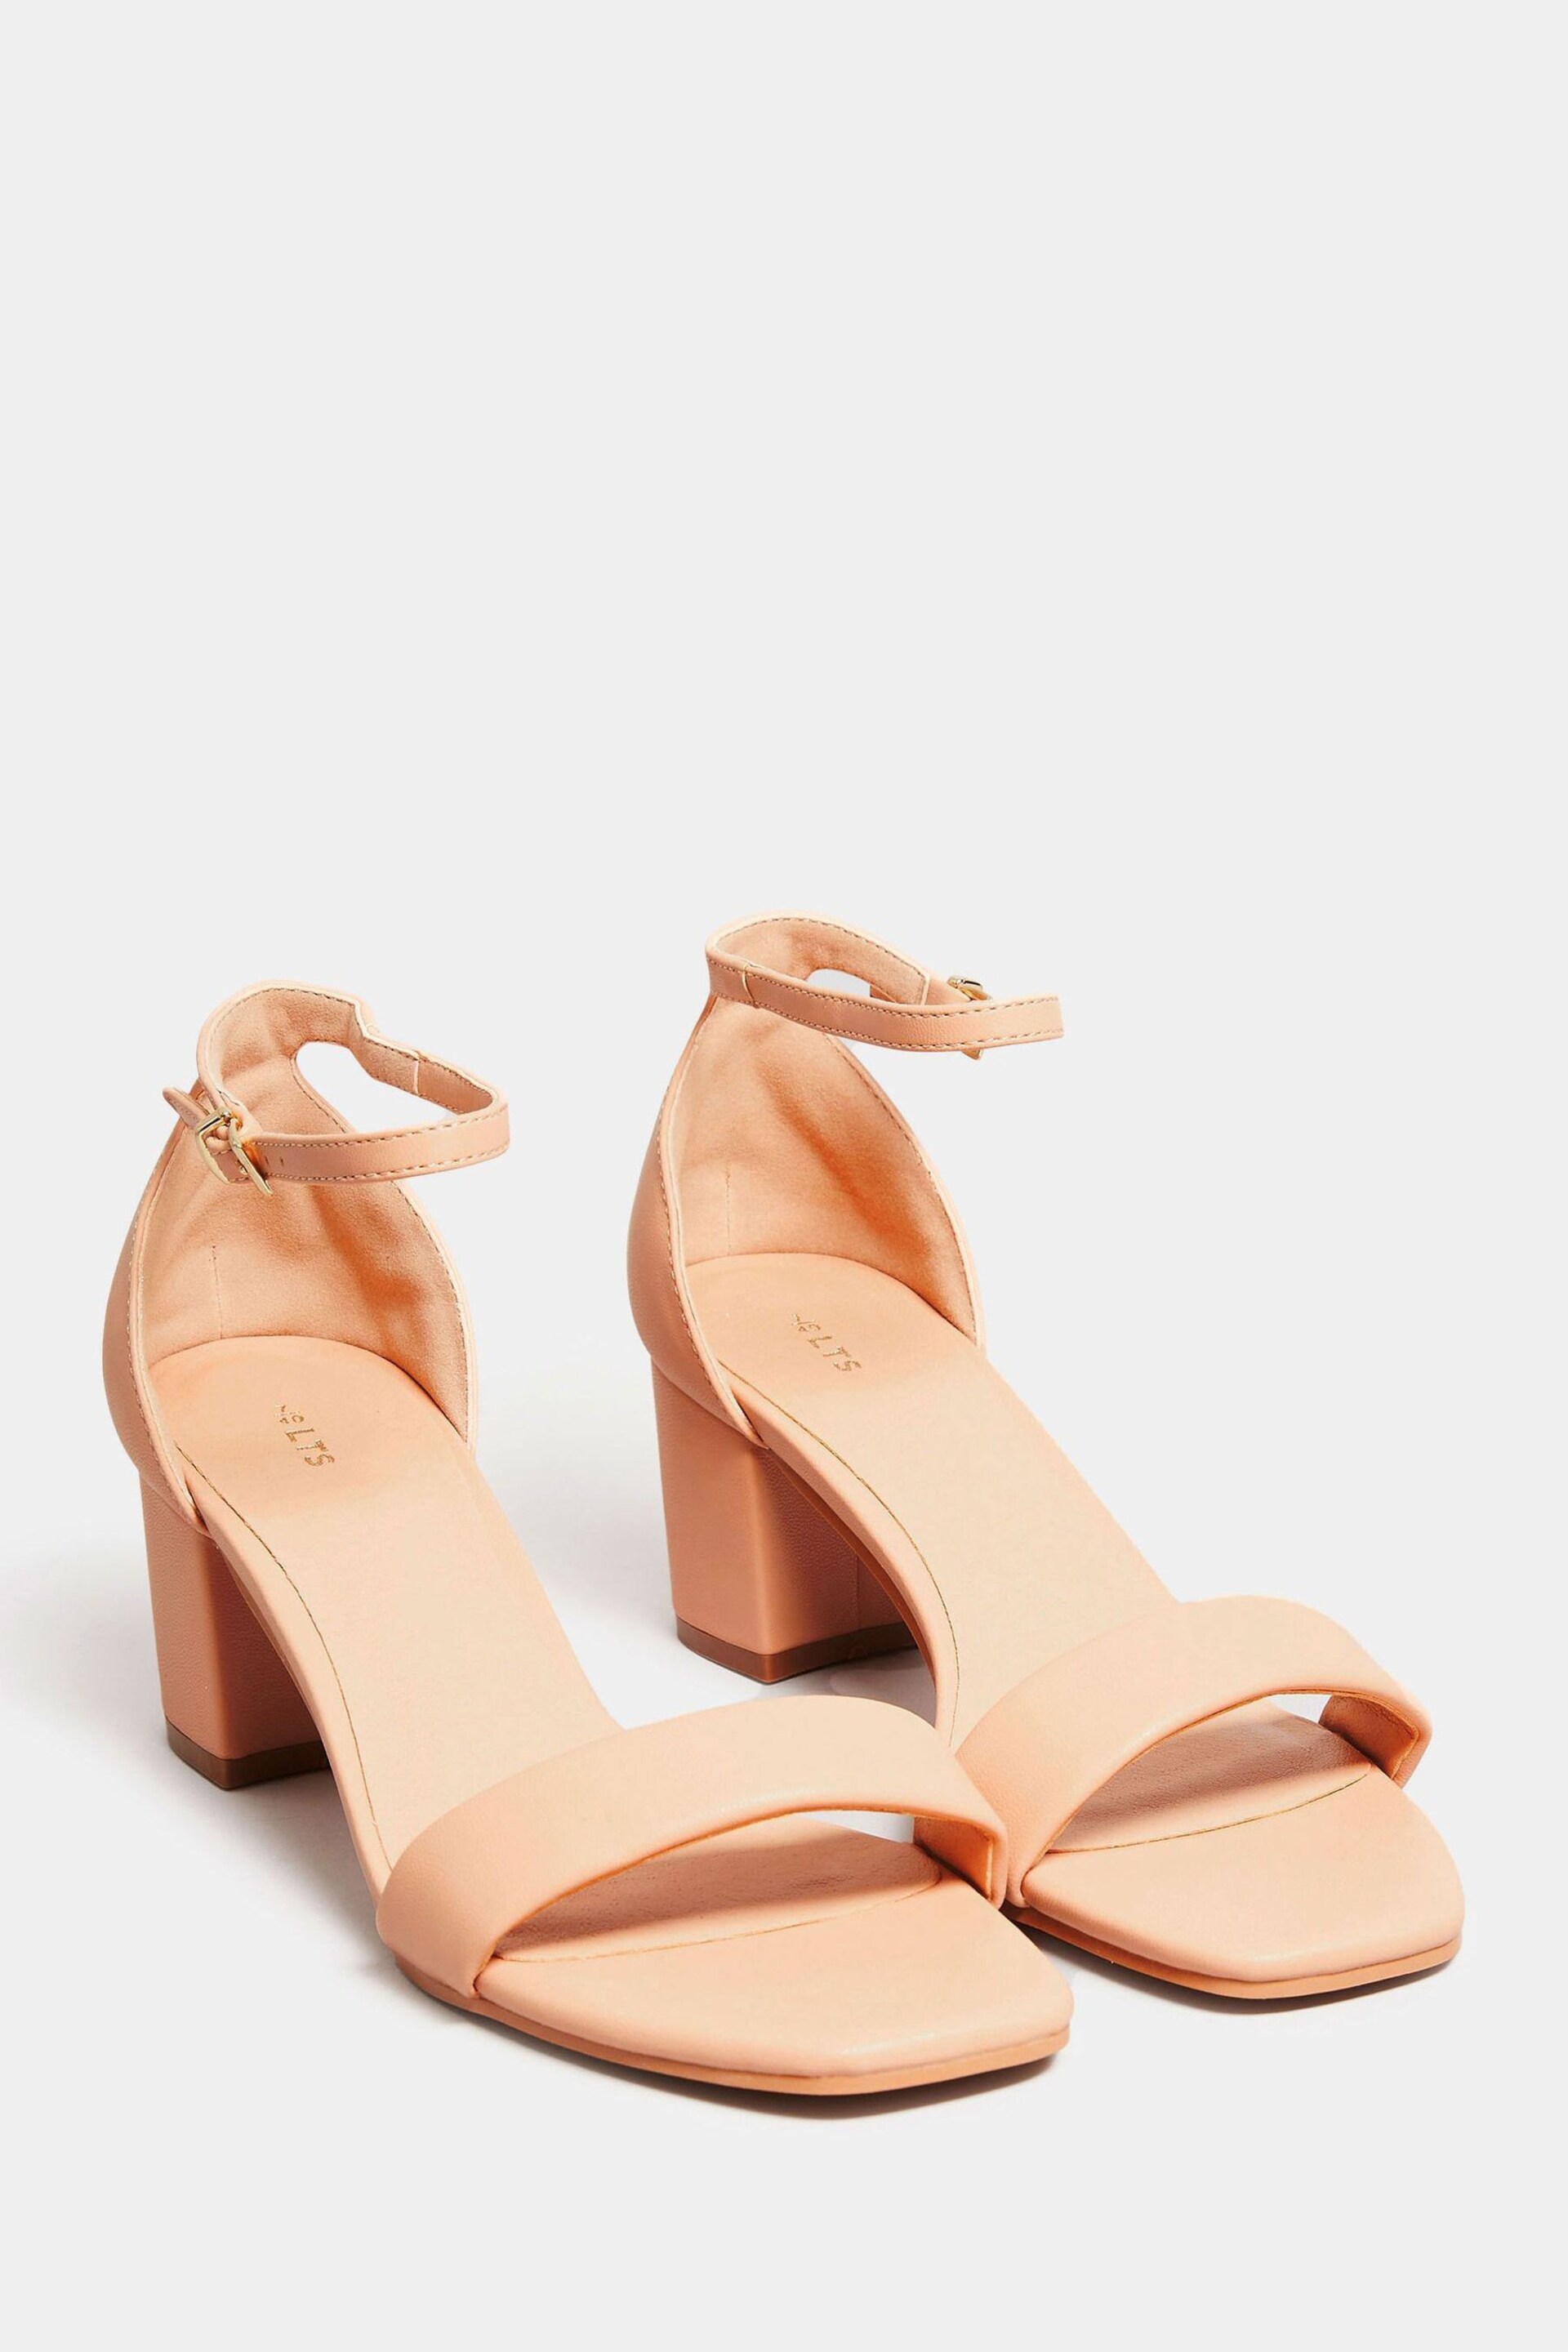 Long Tall Sally Nude Faux Leather Block Heel Sandals - Image 3 of 5